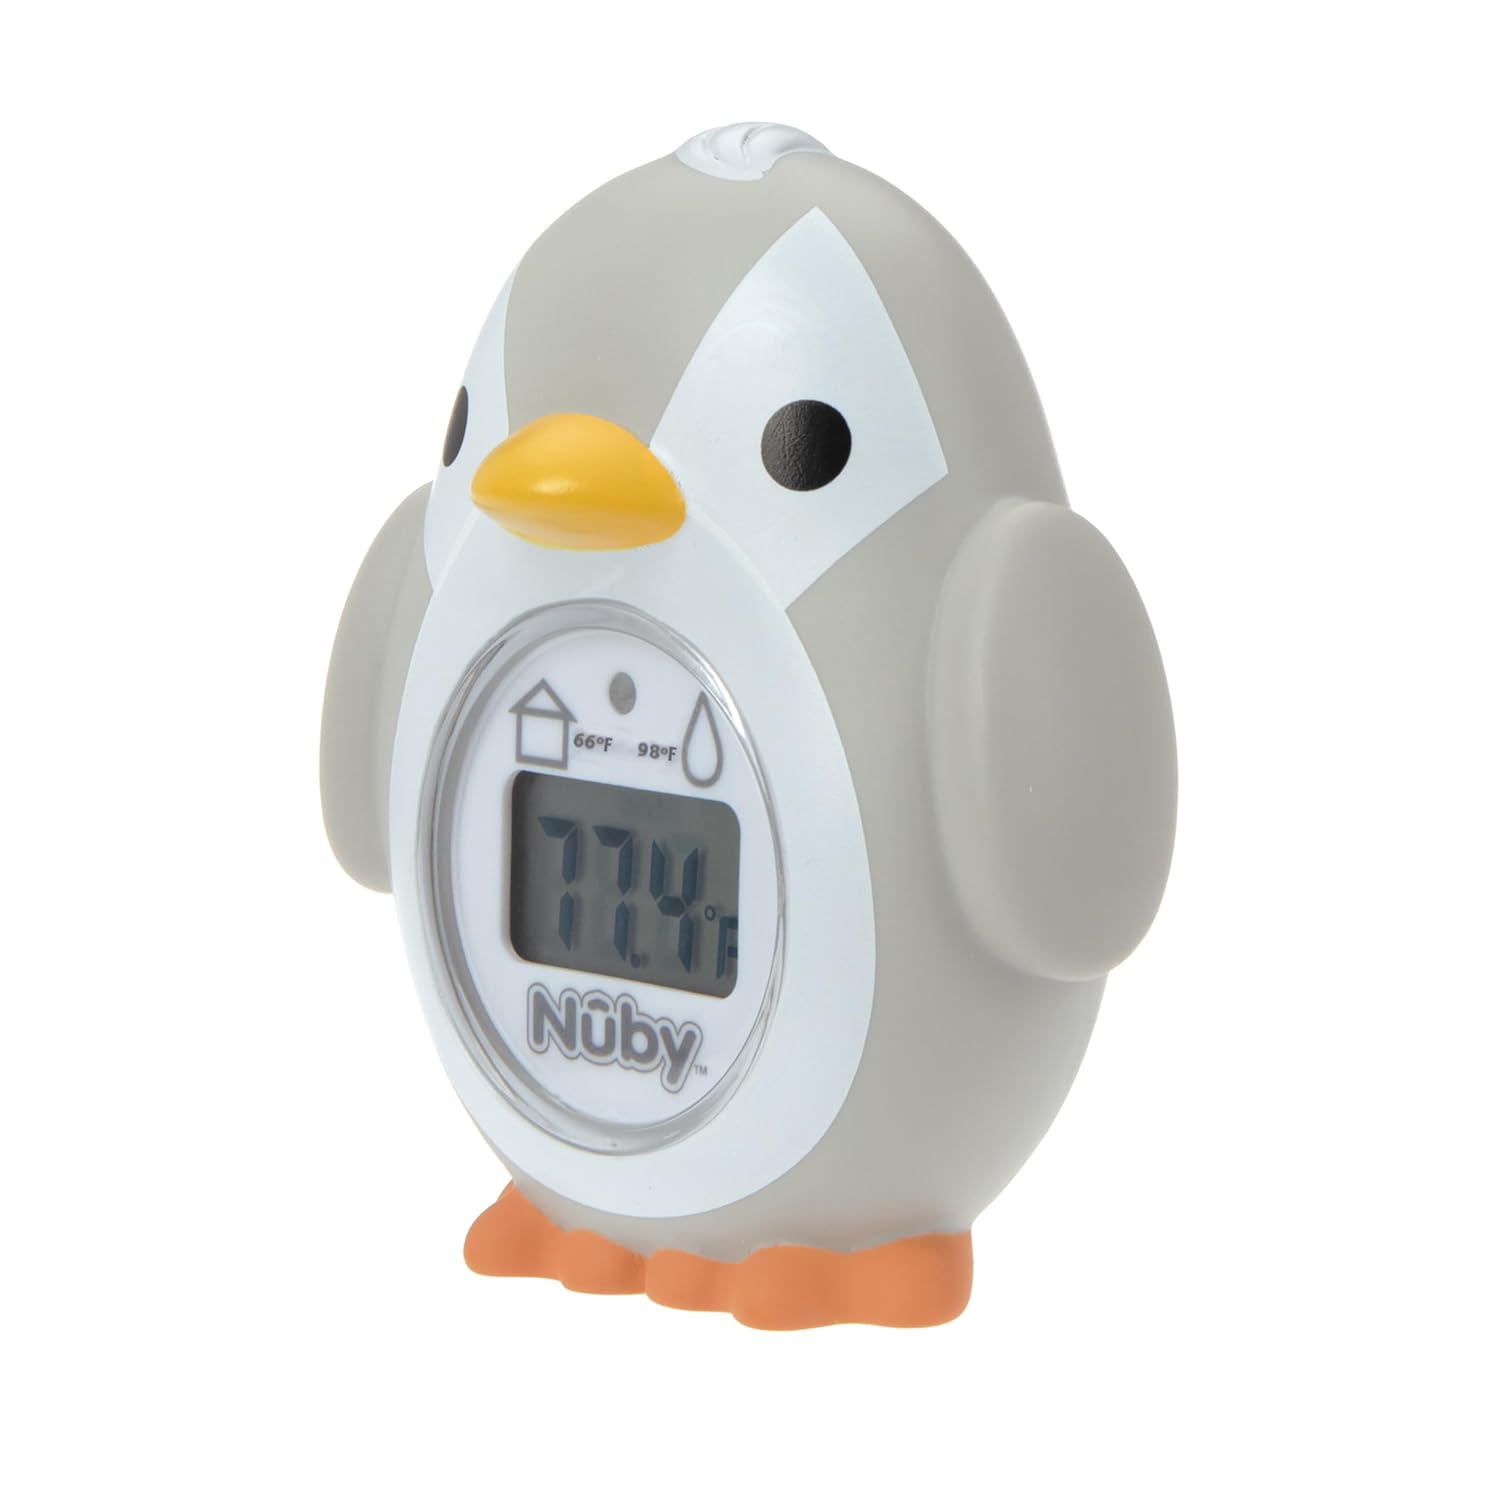 Nuby Bath and Room Digital Thermometer - Baby Thermometer for Safe and Cozy Bath and Room Temperatures - Penguin : Baby